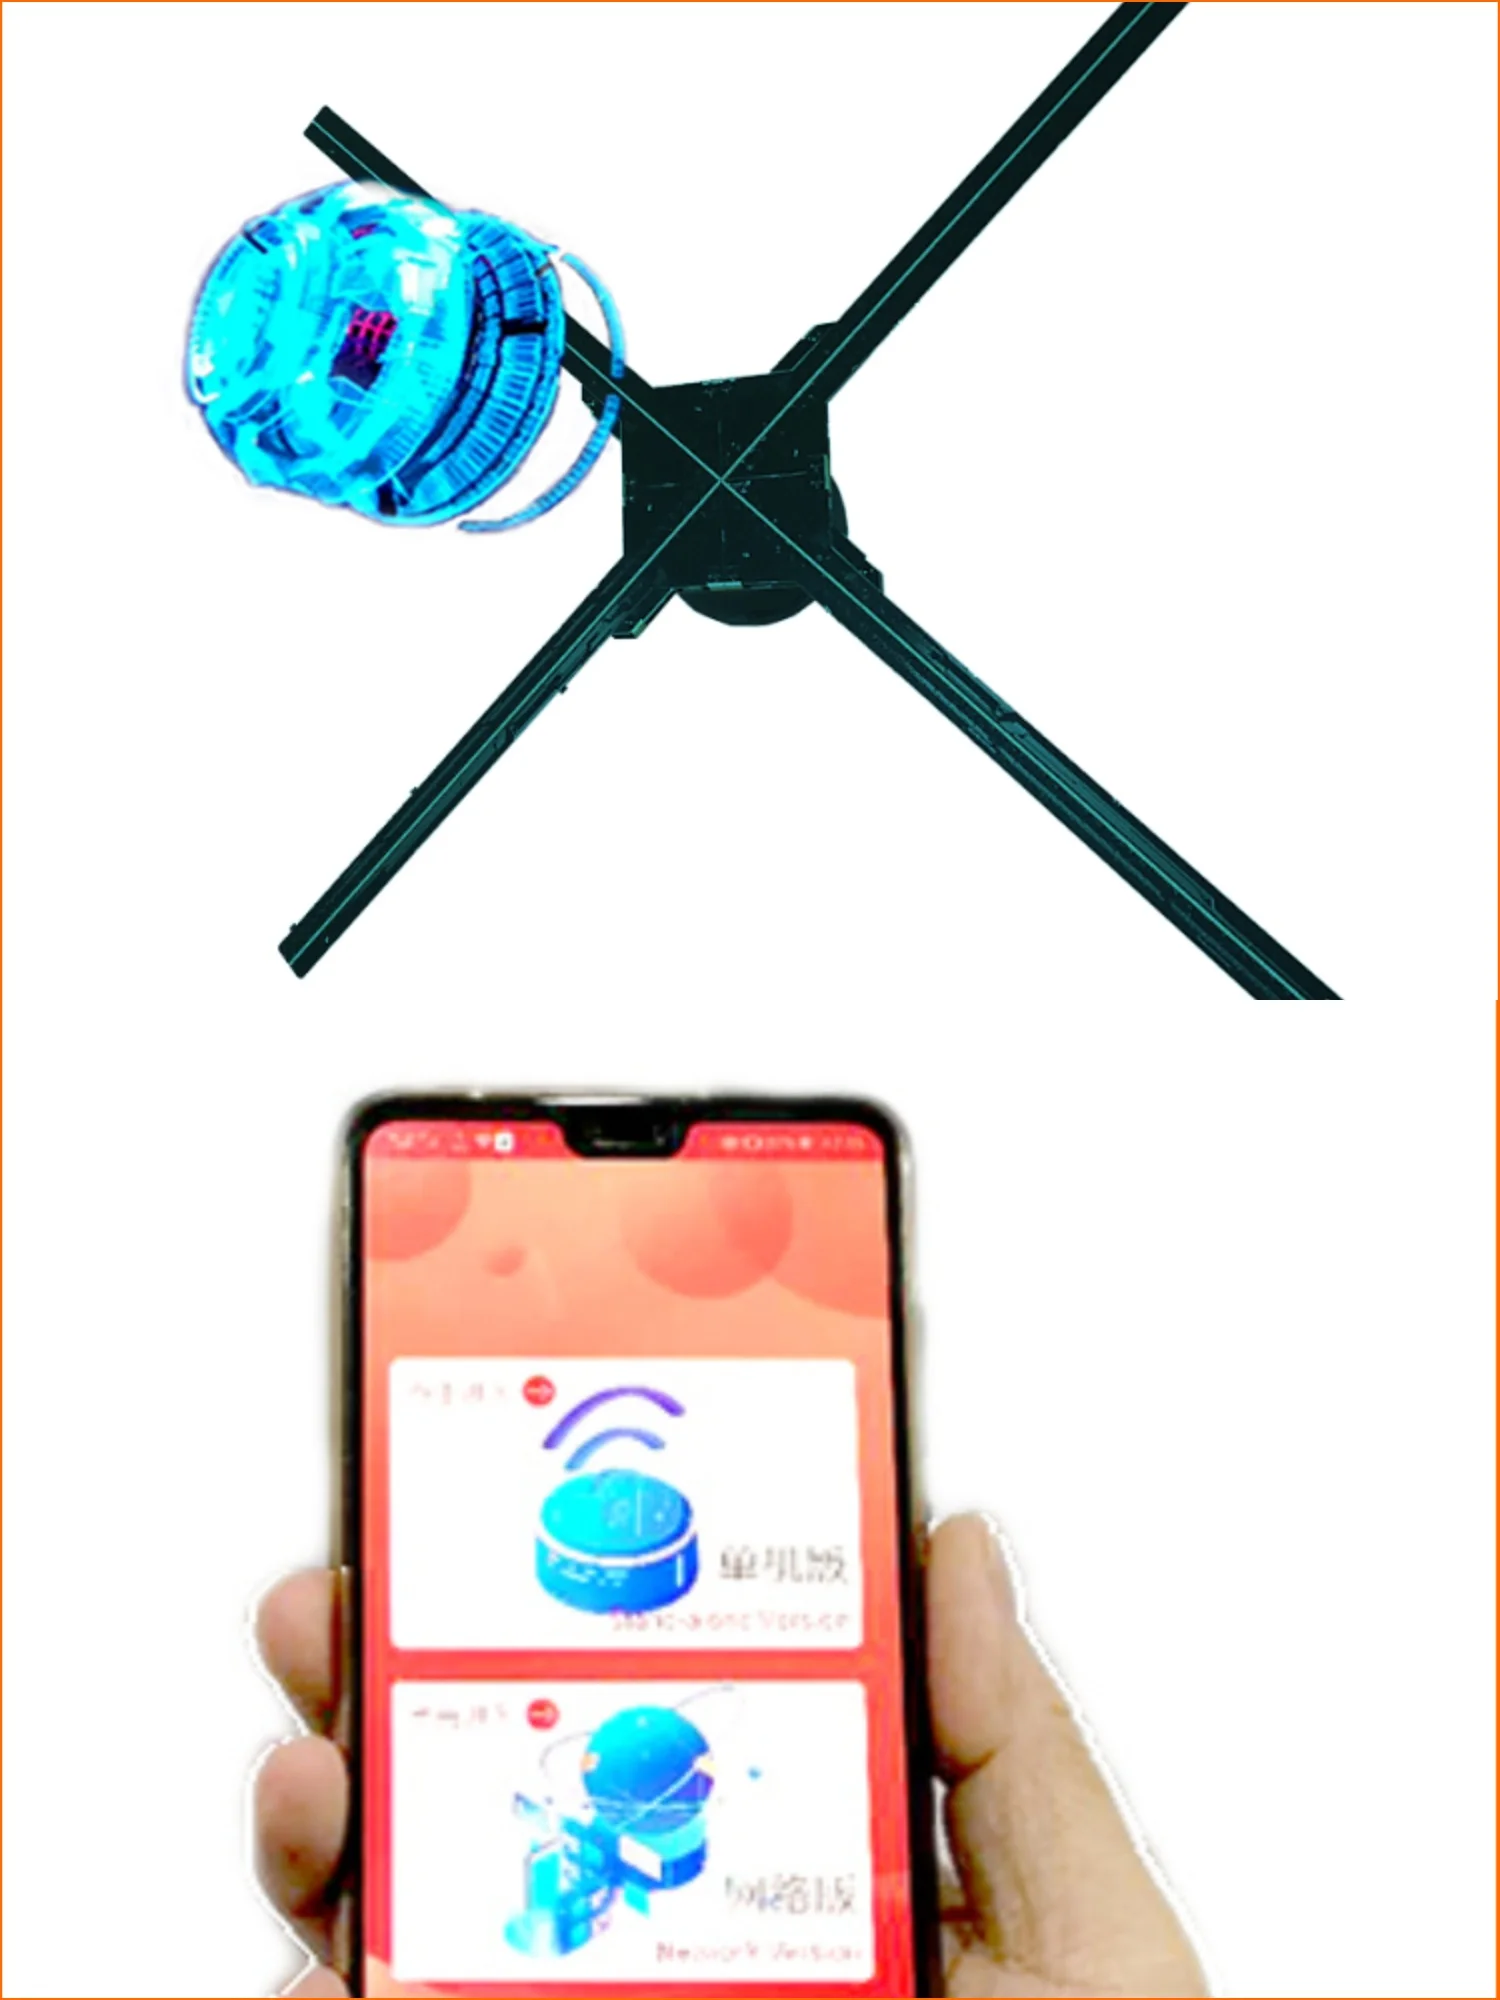 Led Hologram Advertising Display Fan Factory Cheap Price Portable Wifi/app Control 3d Outdoor OEM Quad-core 1.5G, 16GB Storage